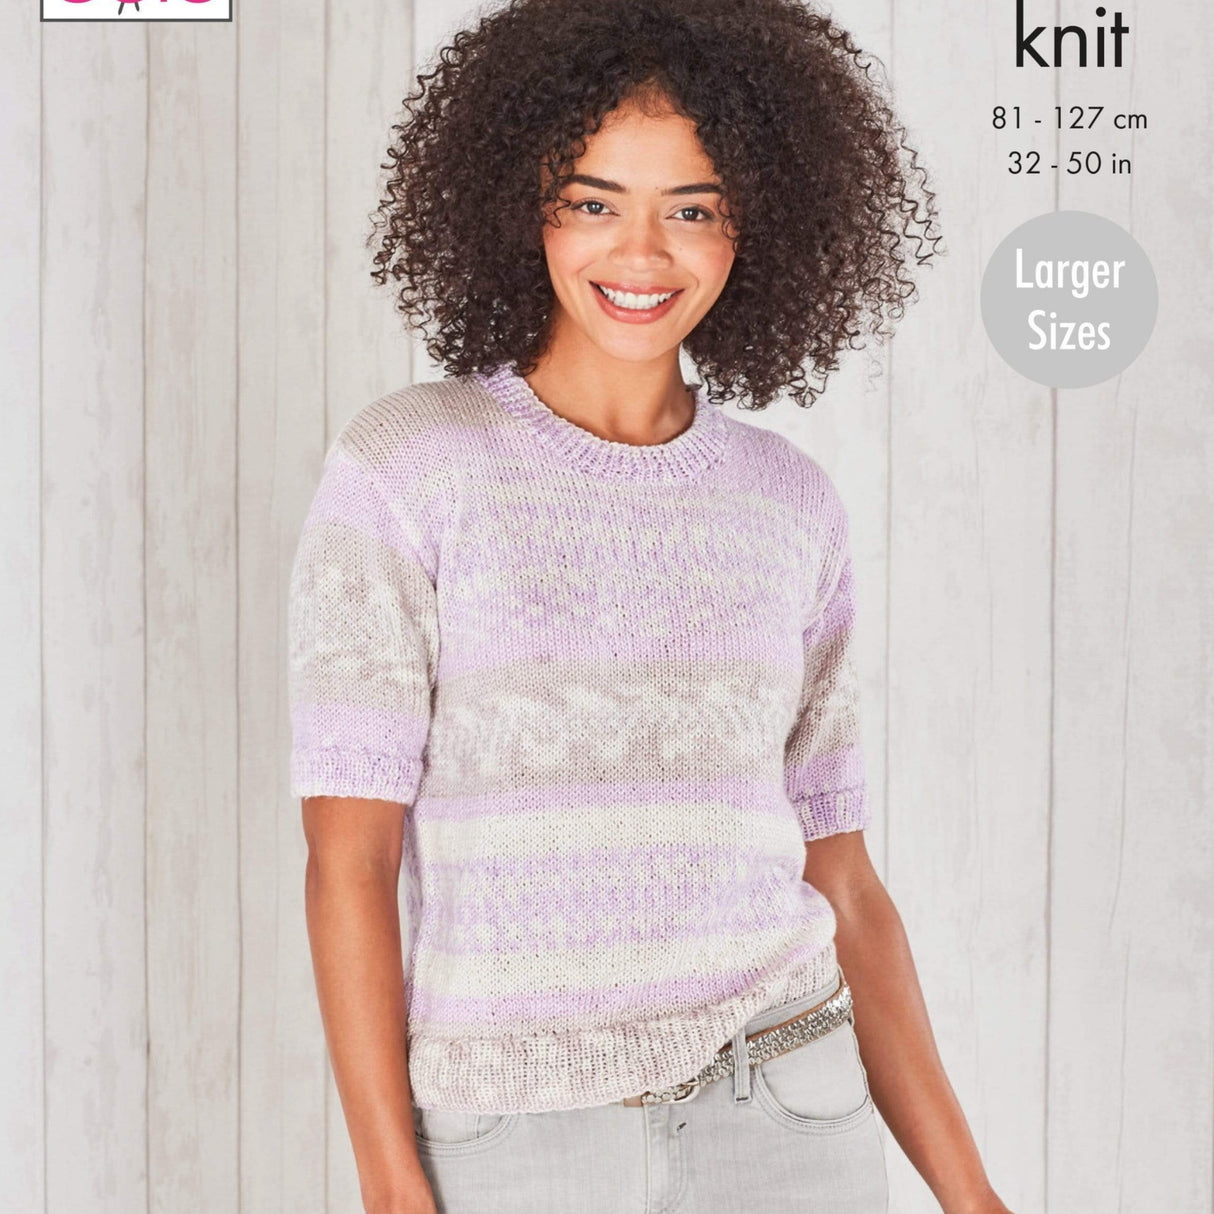 King Cole Patterns King Cole Ladies Cardigan and Sweater DK Knitting Pattern 5696